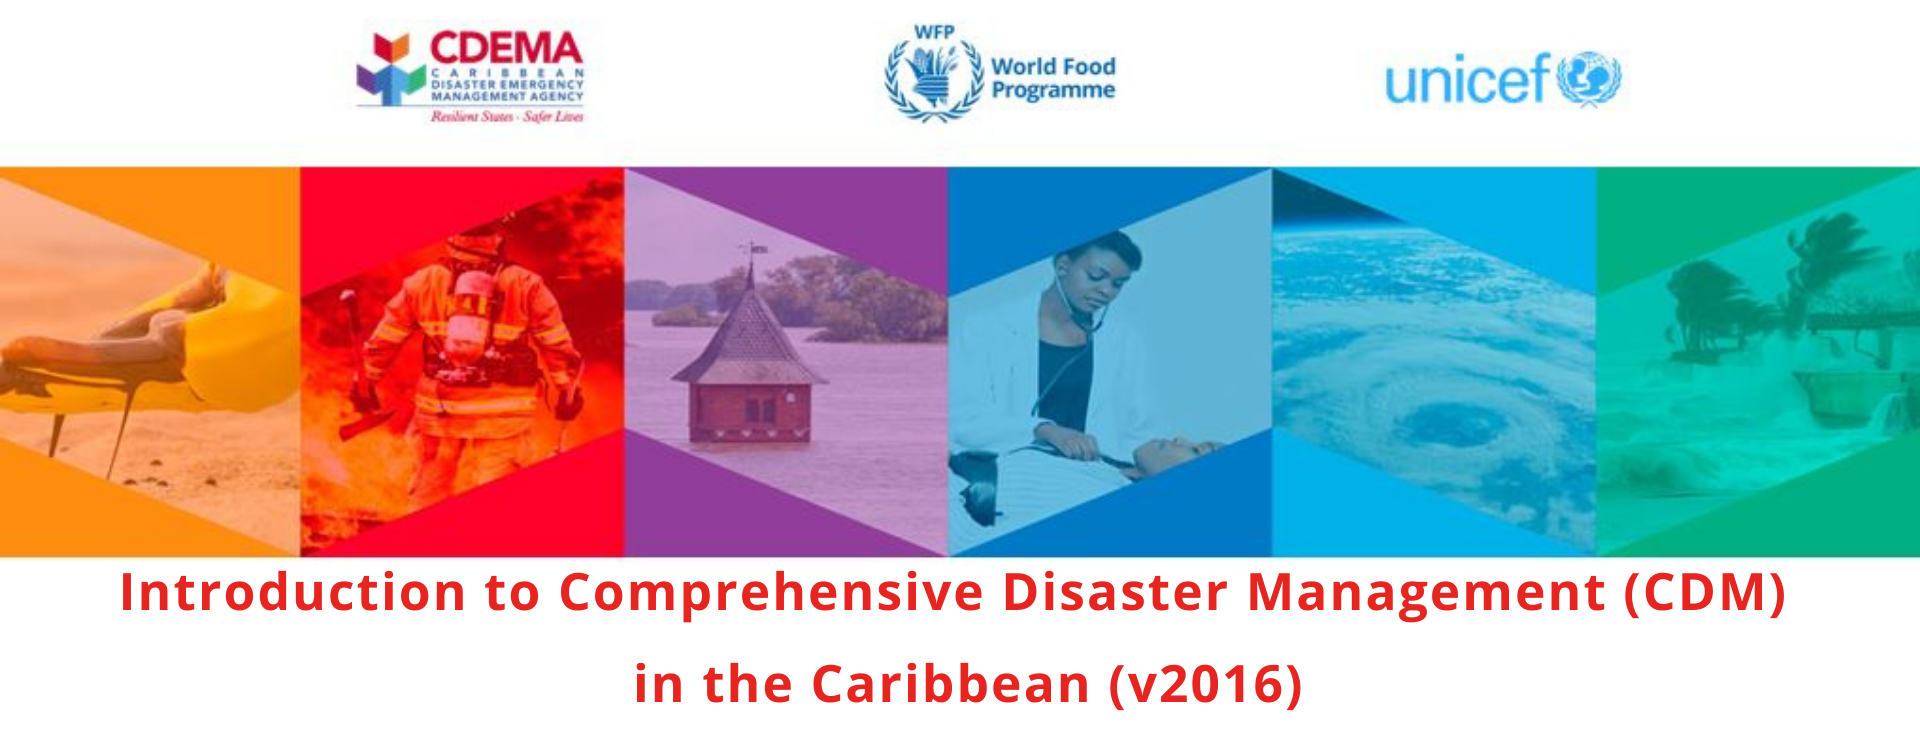 Introduction to Comprehensive Disaster Management (CDM) in the Caribbean (v2016)